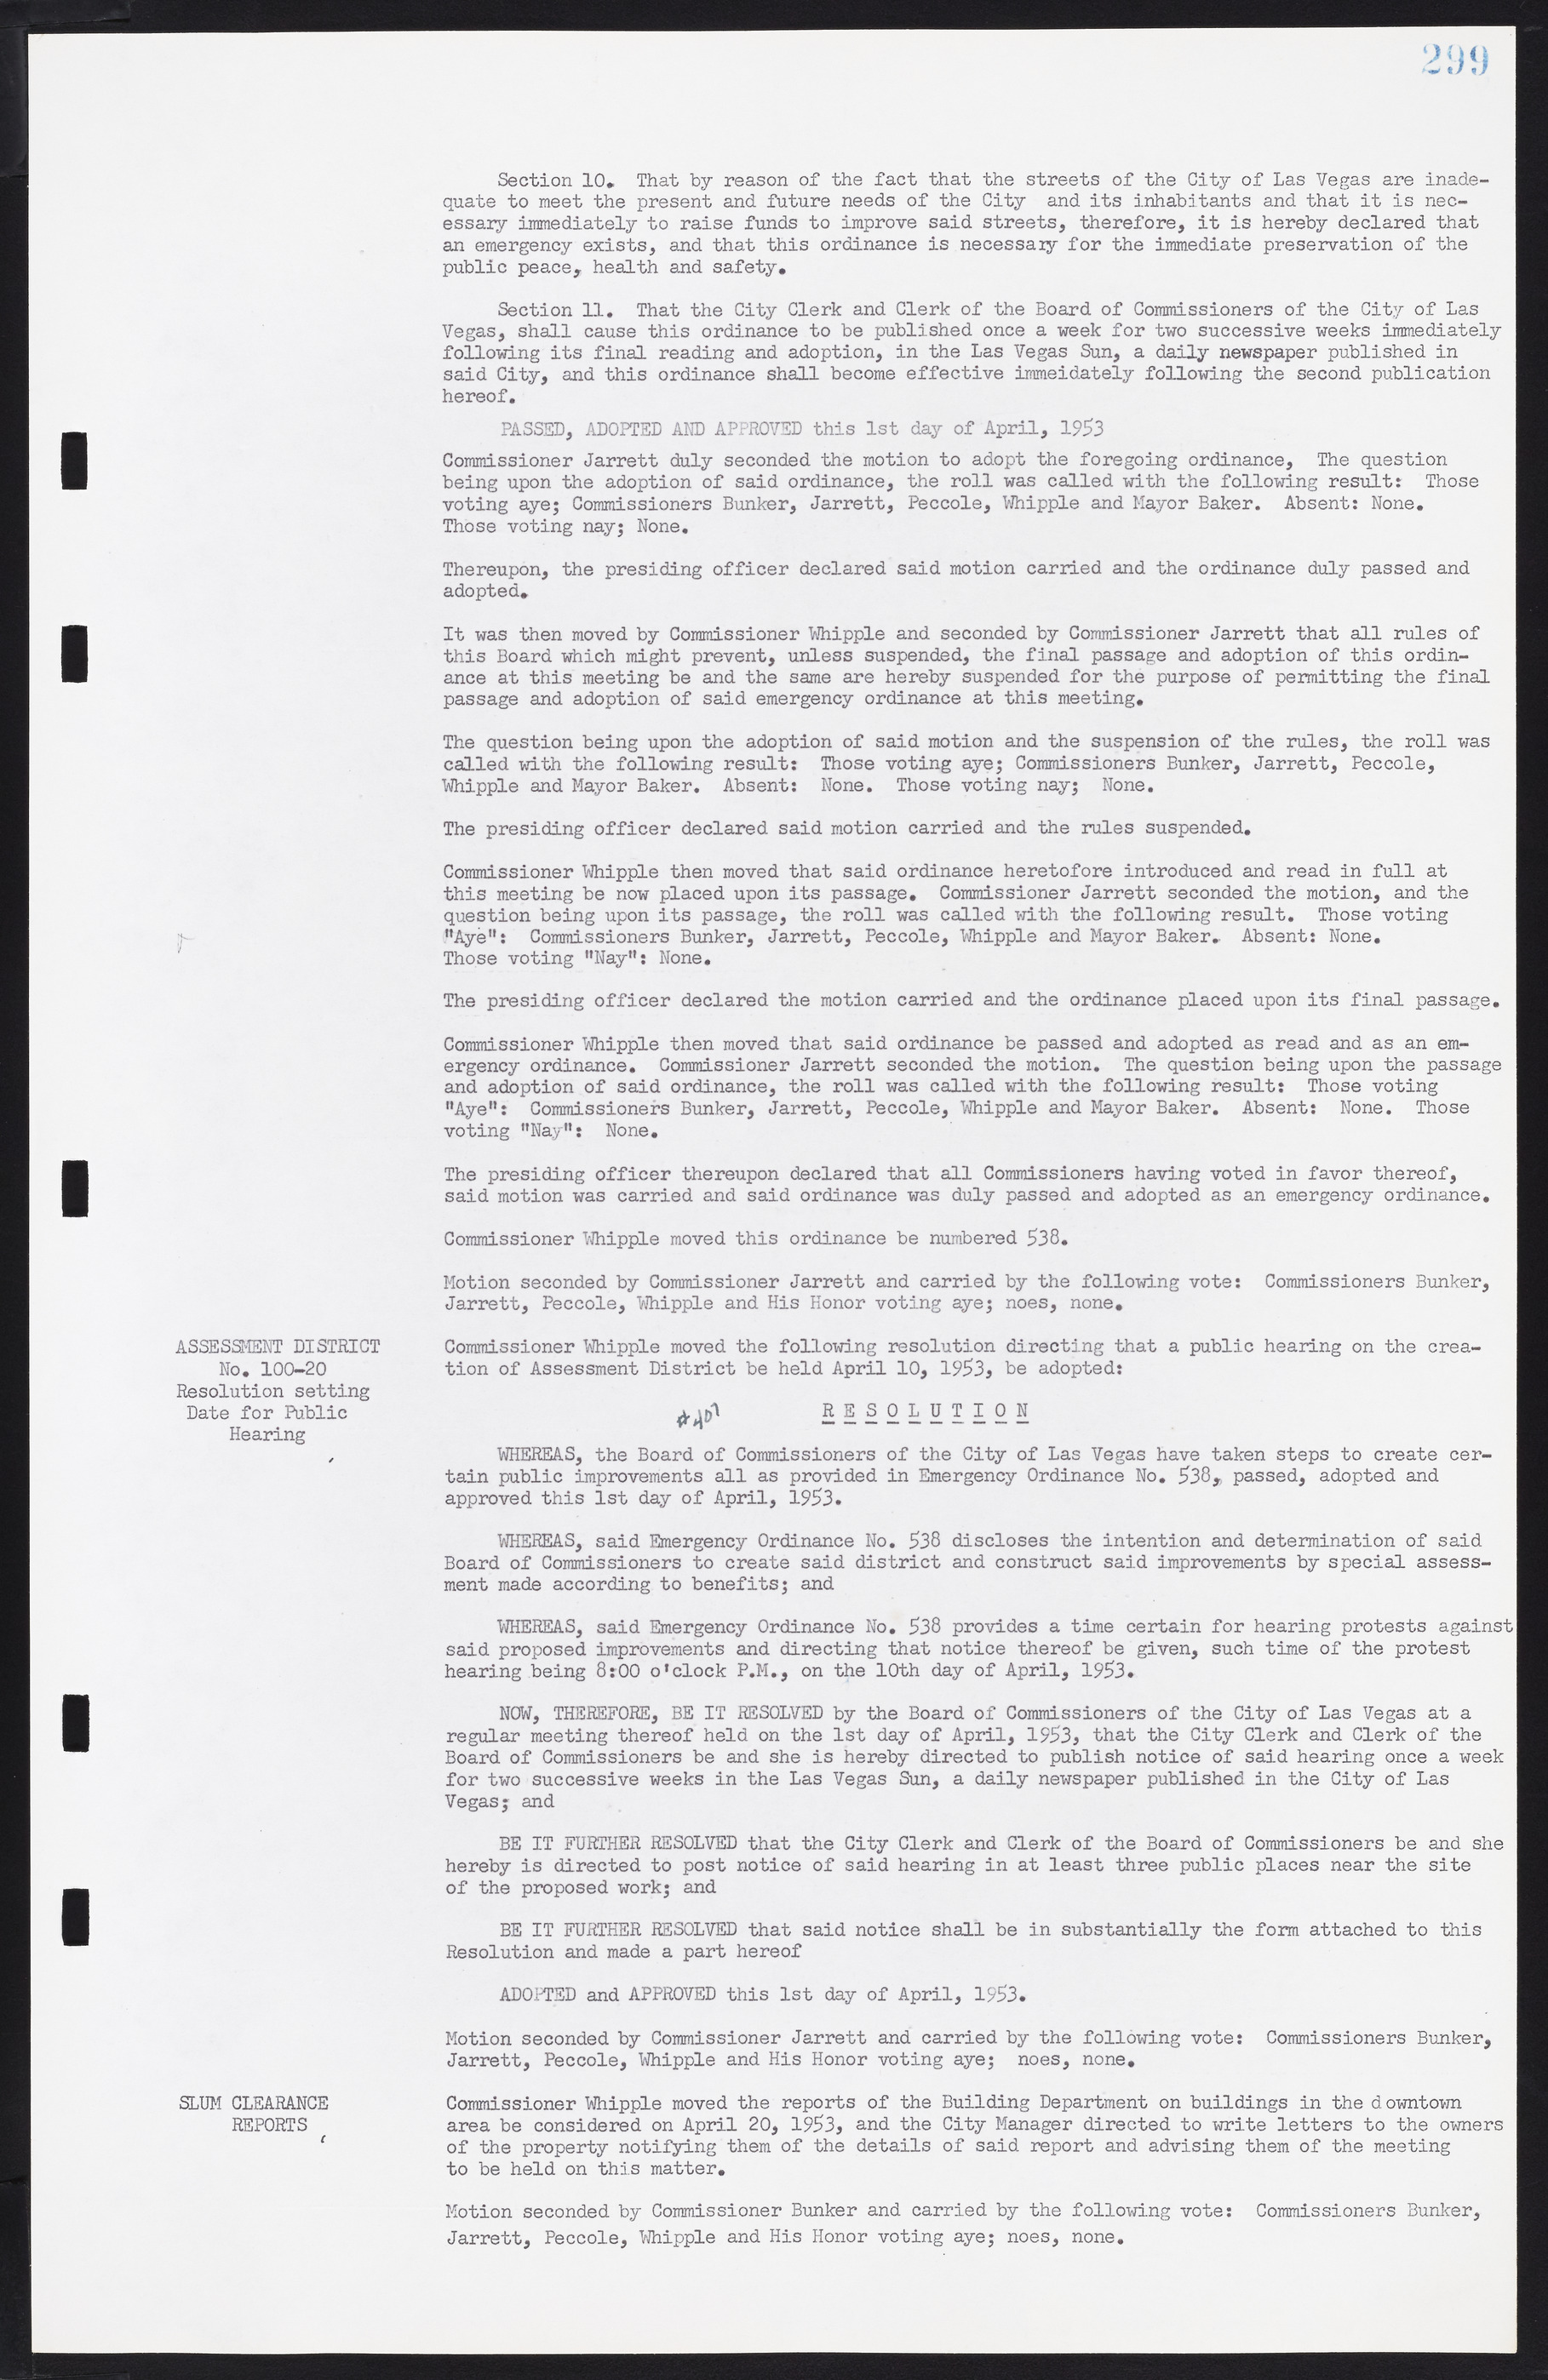 Las Vegas City Commission Minutes, May 26, 1952 to February 17, 1954, lvc000008-327